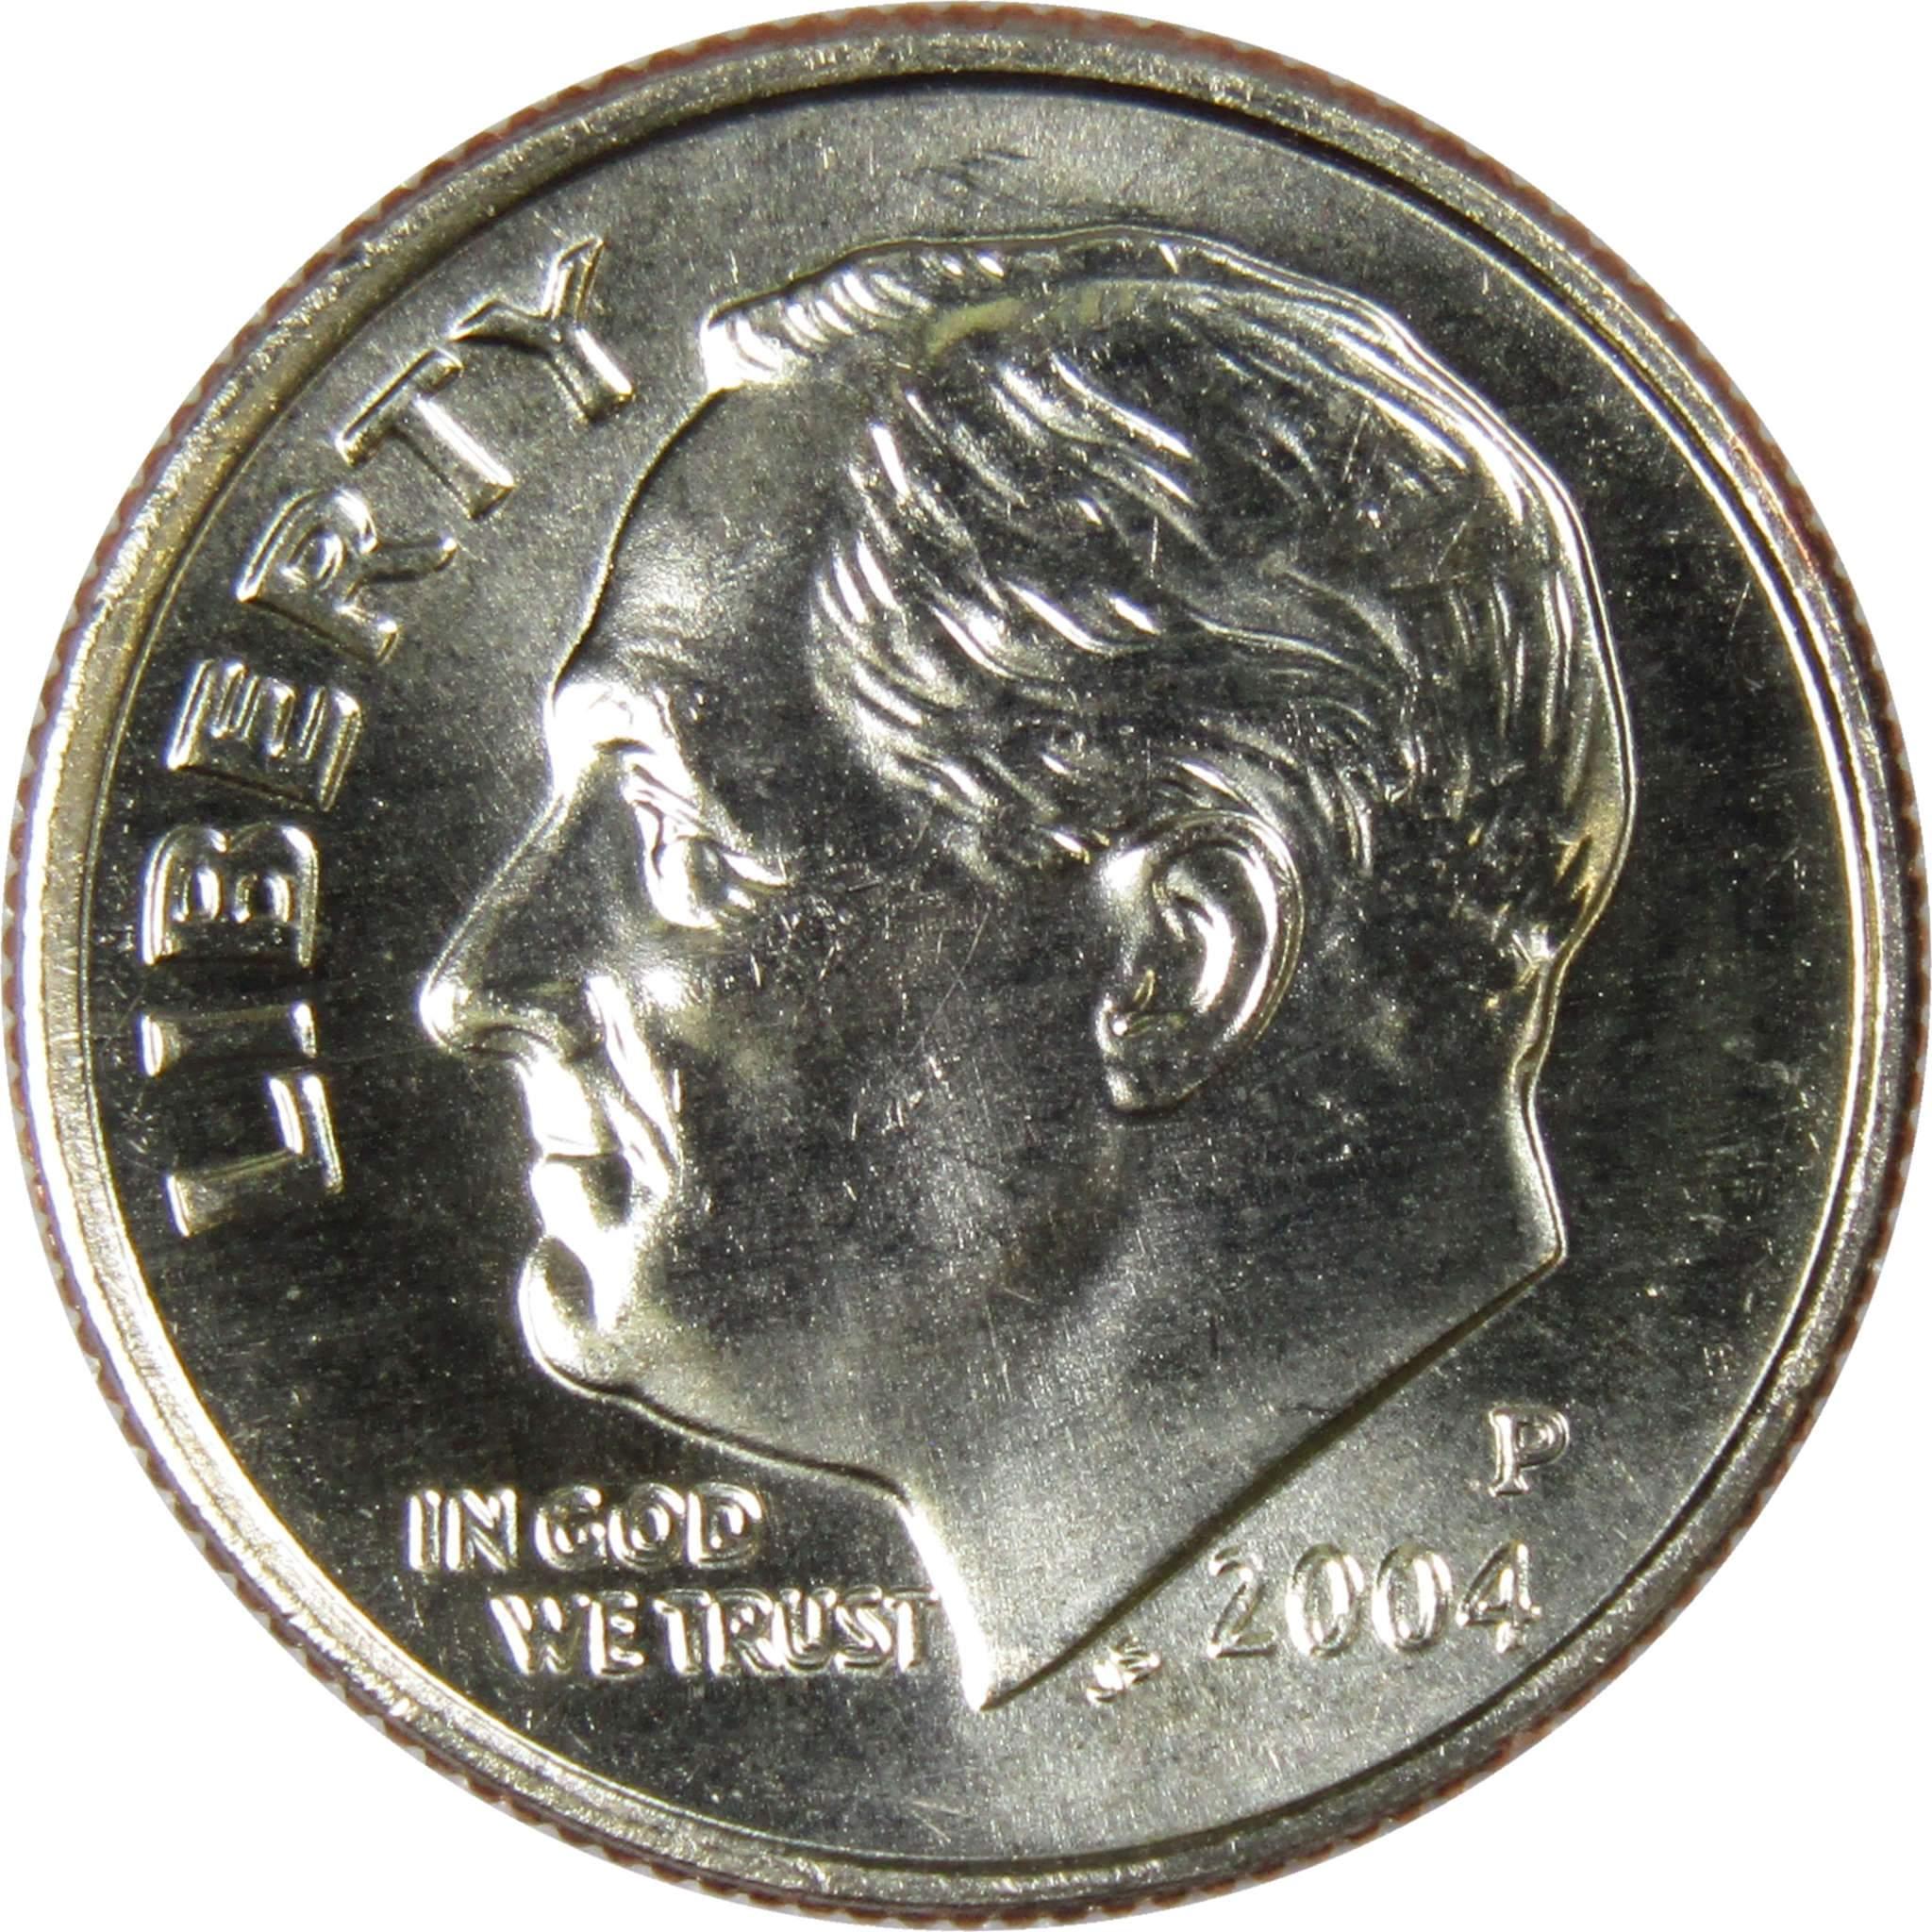 2004 P Roosevelt Dime BU Uncirculated Mint State 10c US Coin Collectible